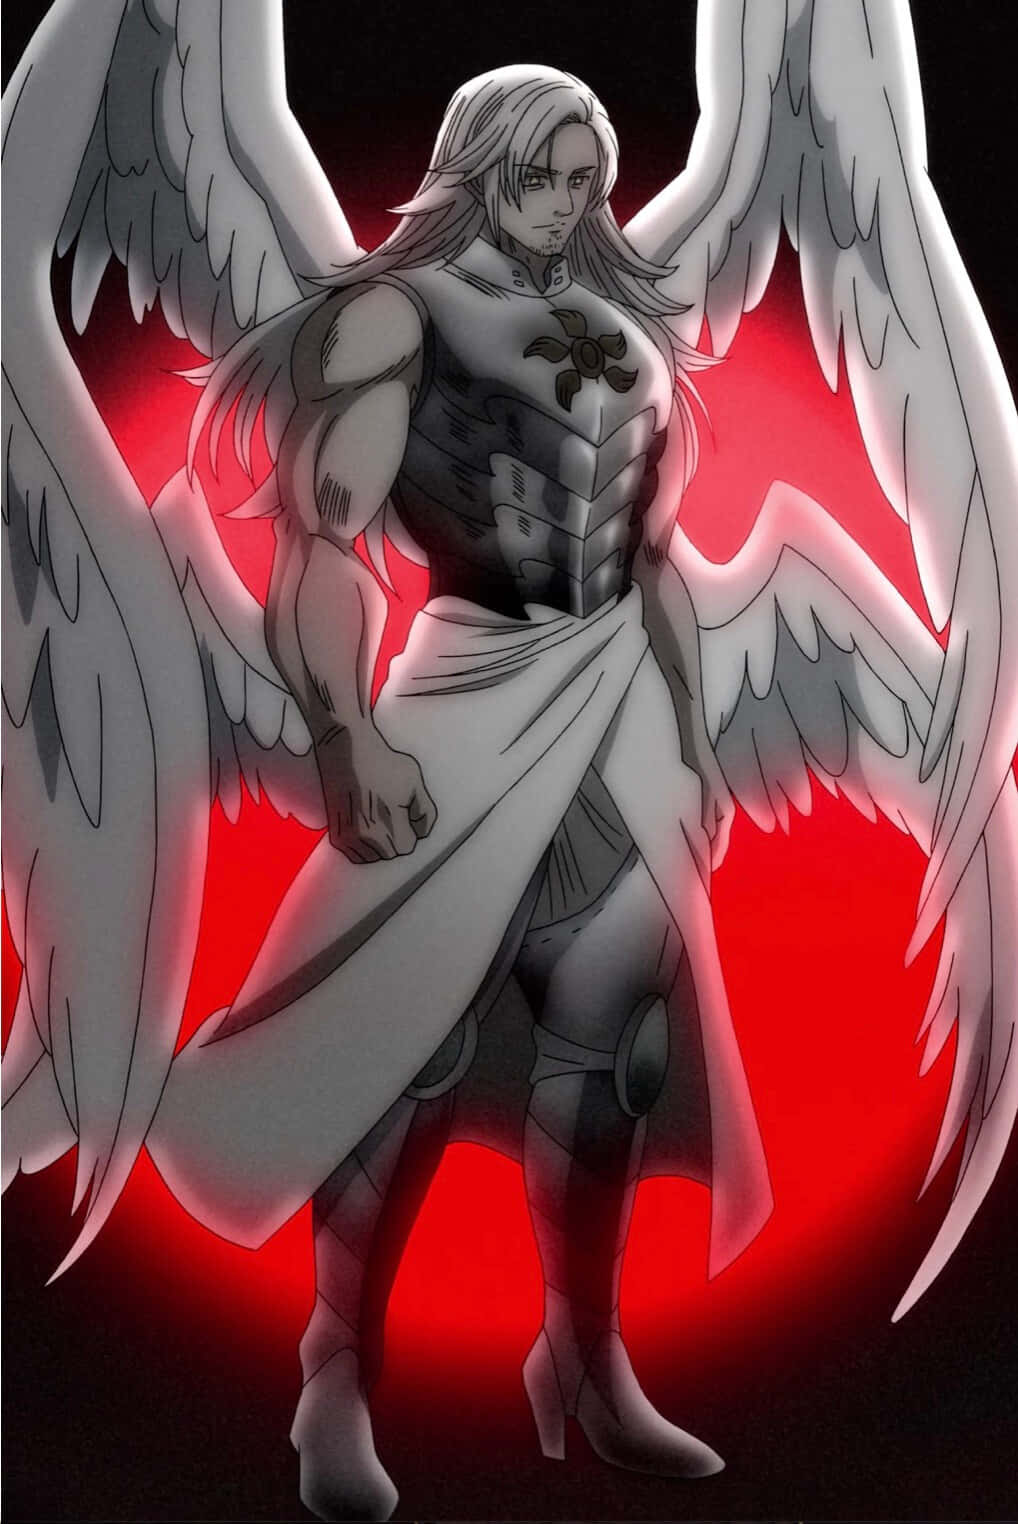 Caption: Mael, The Angel of Light, in Seven Deadly Sins Wallpaper